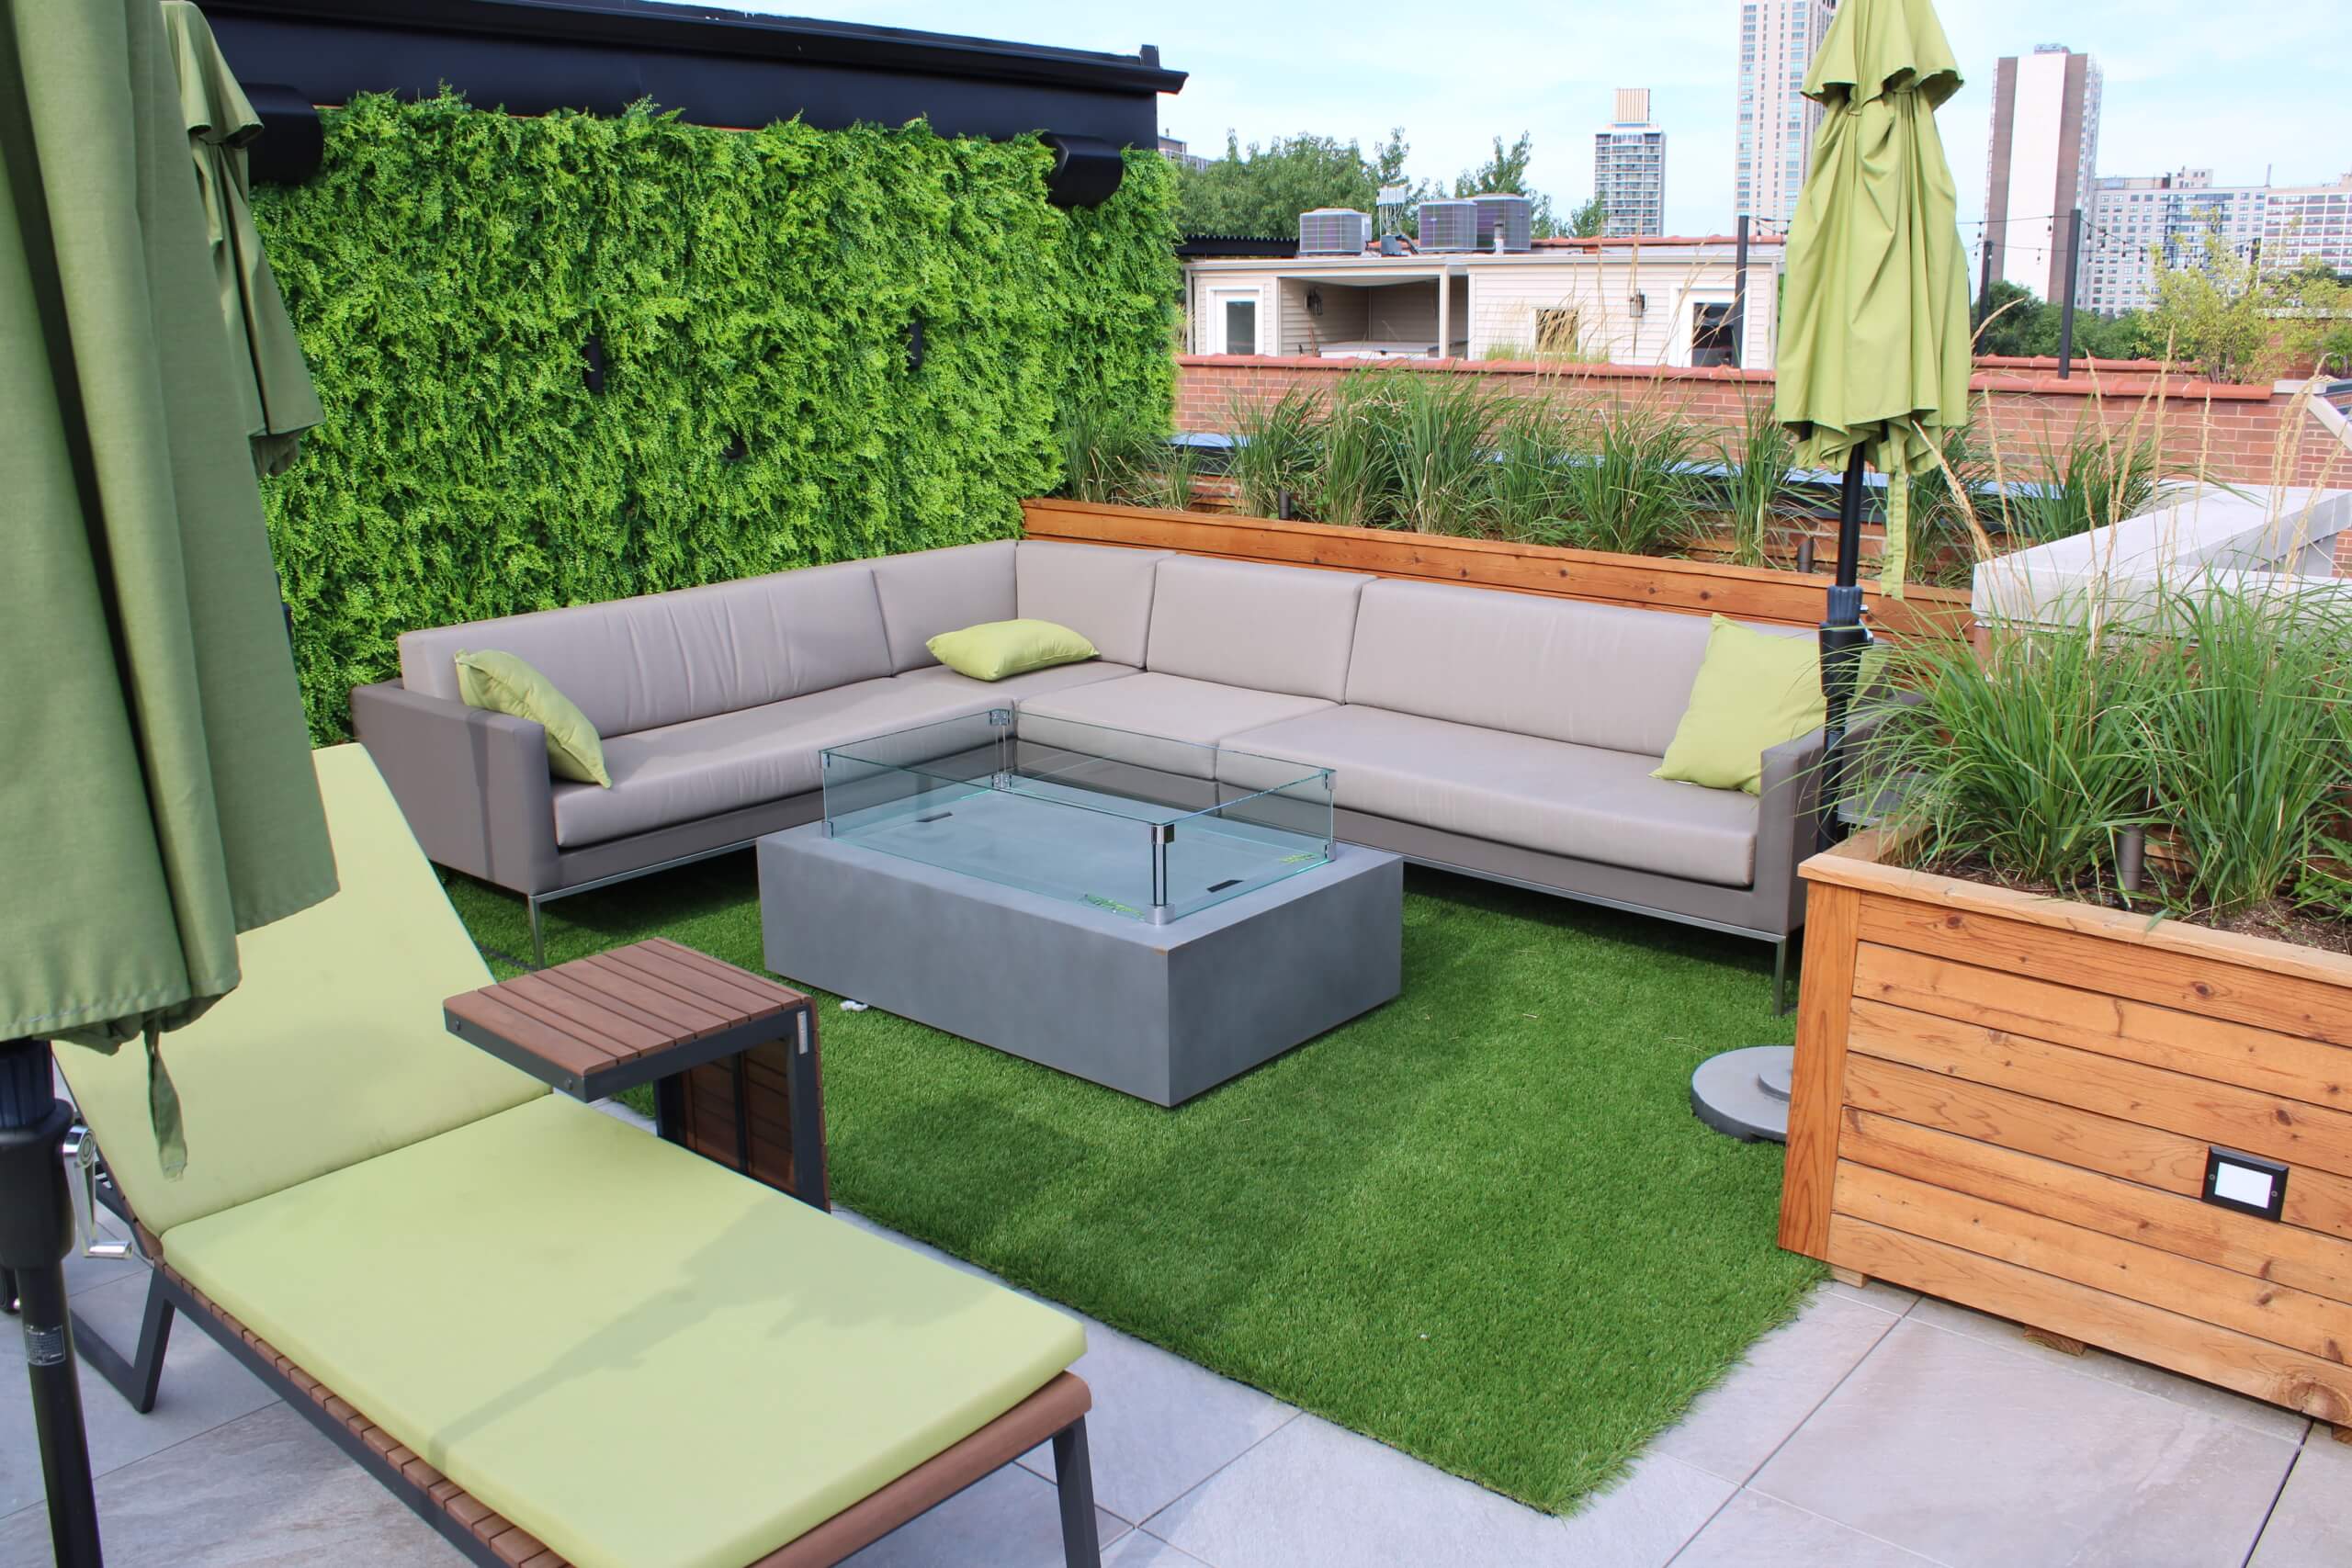 Roof Deck with fire pit and built-in planters lakeview chicago il